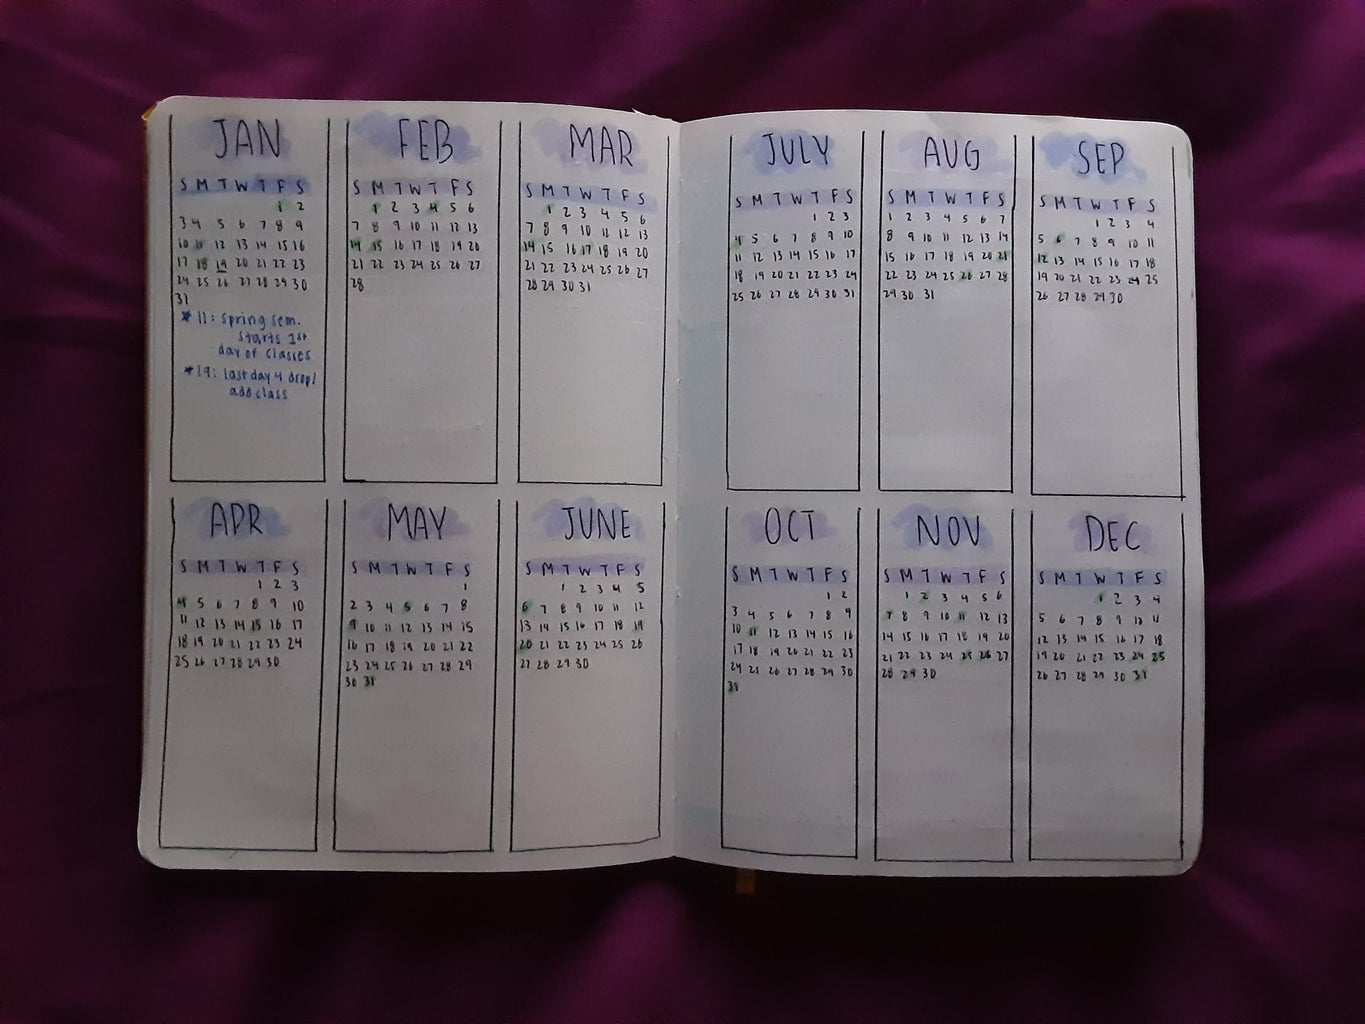 Bullet journal spread of yearly calendar for 2021.